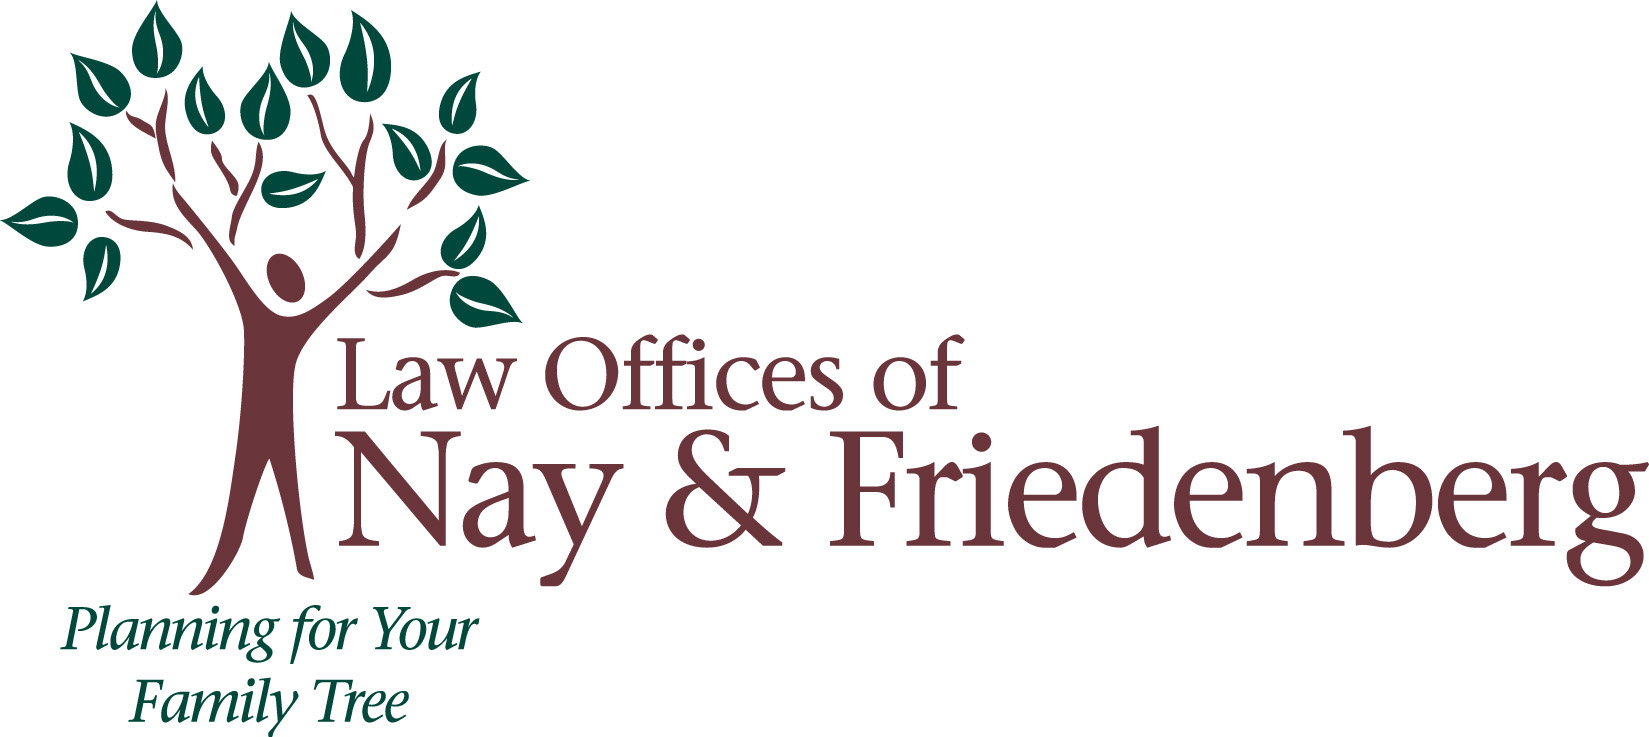 Nay and Friedenberg - Law Offices